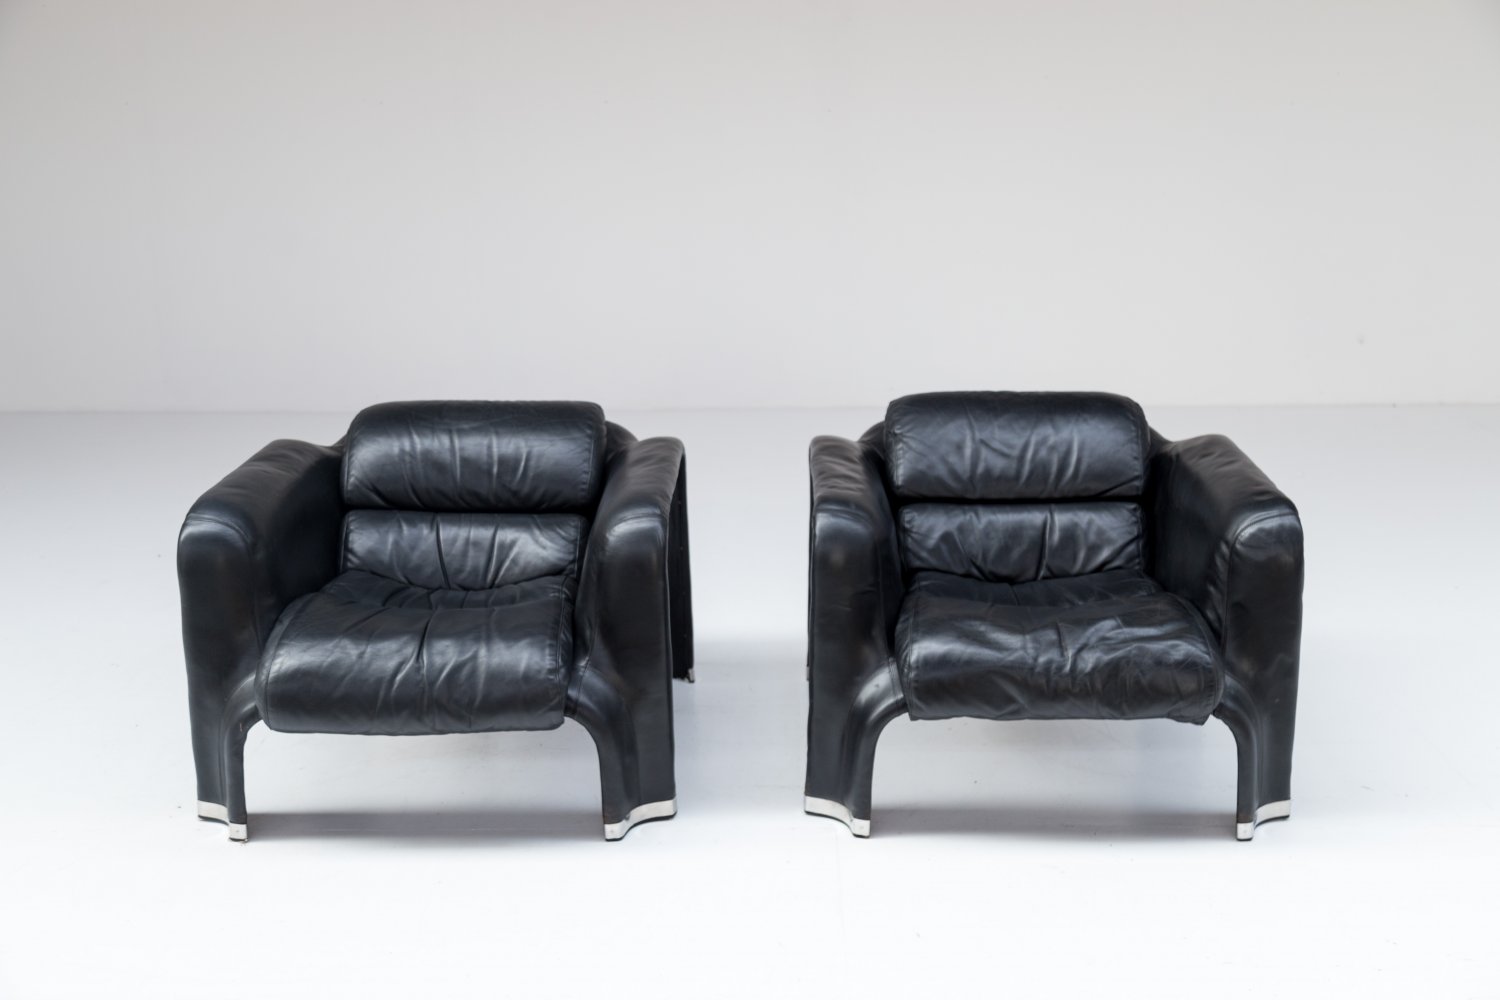 Pair of black leather Pohjola chairs by Pekka Perjo for Haimi Finland.